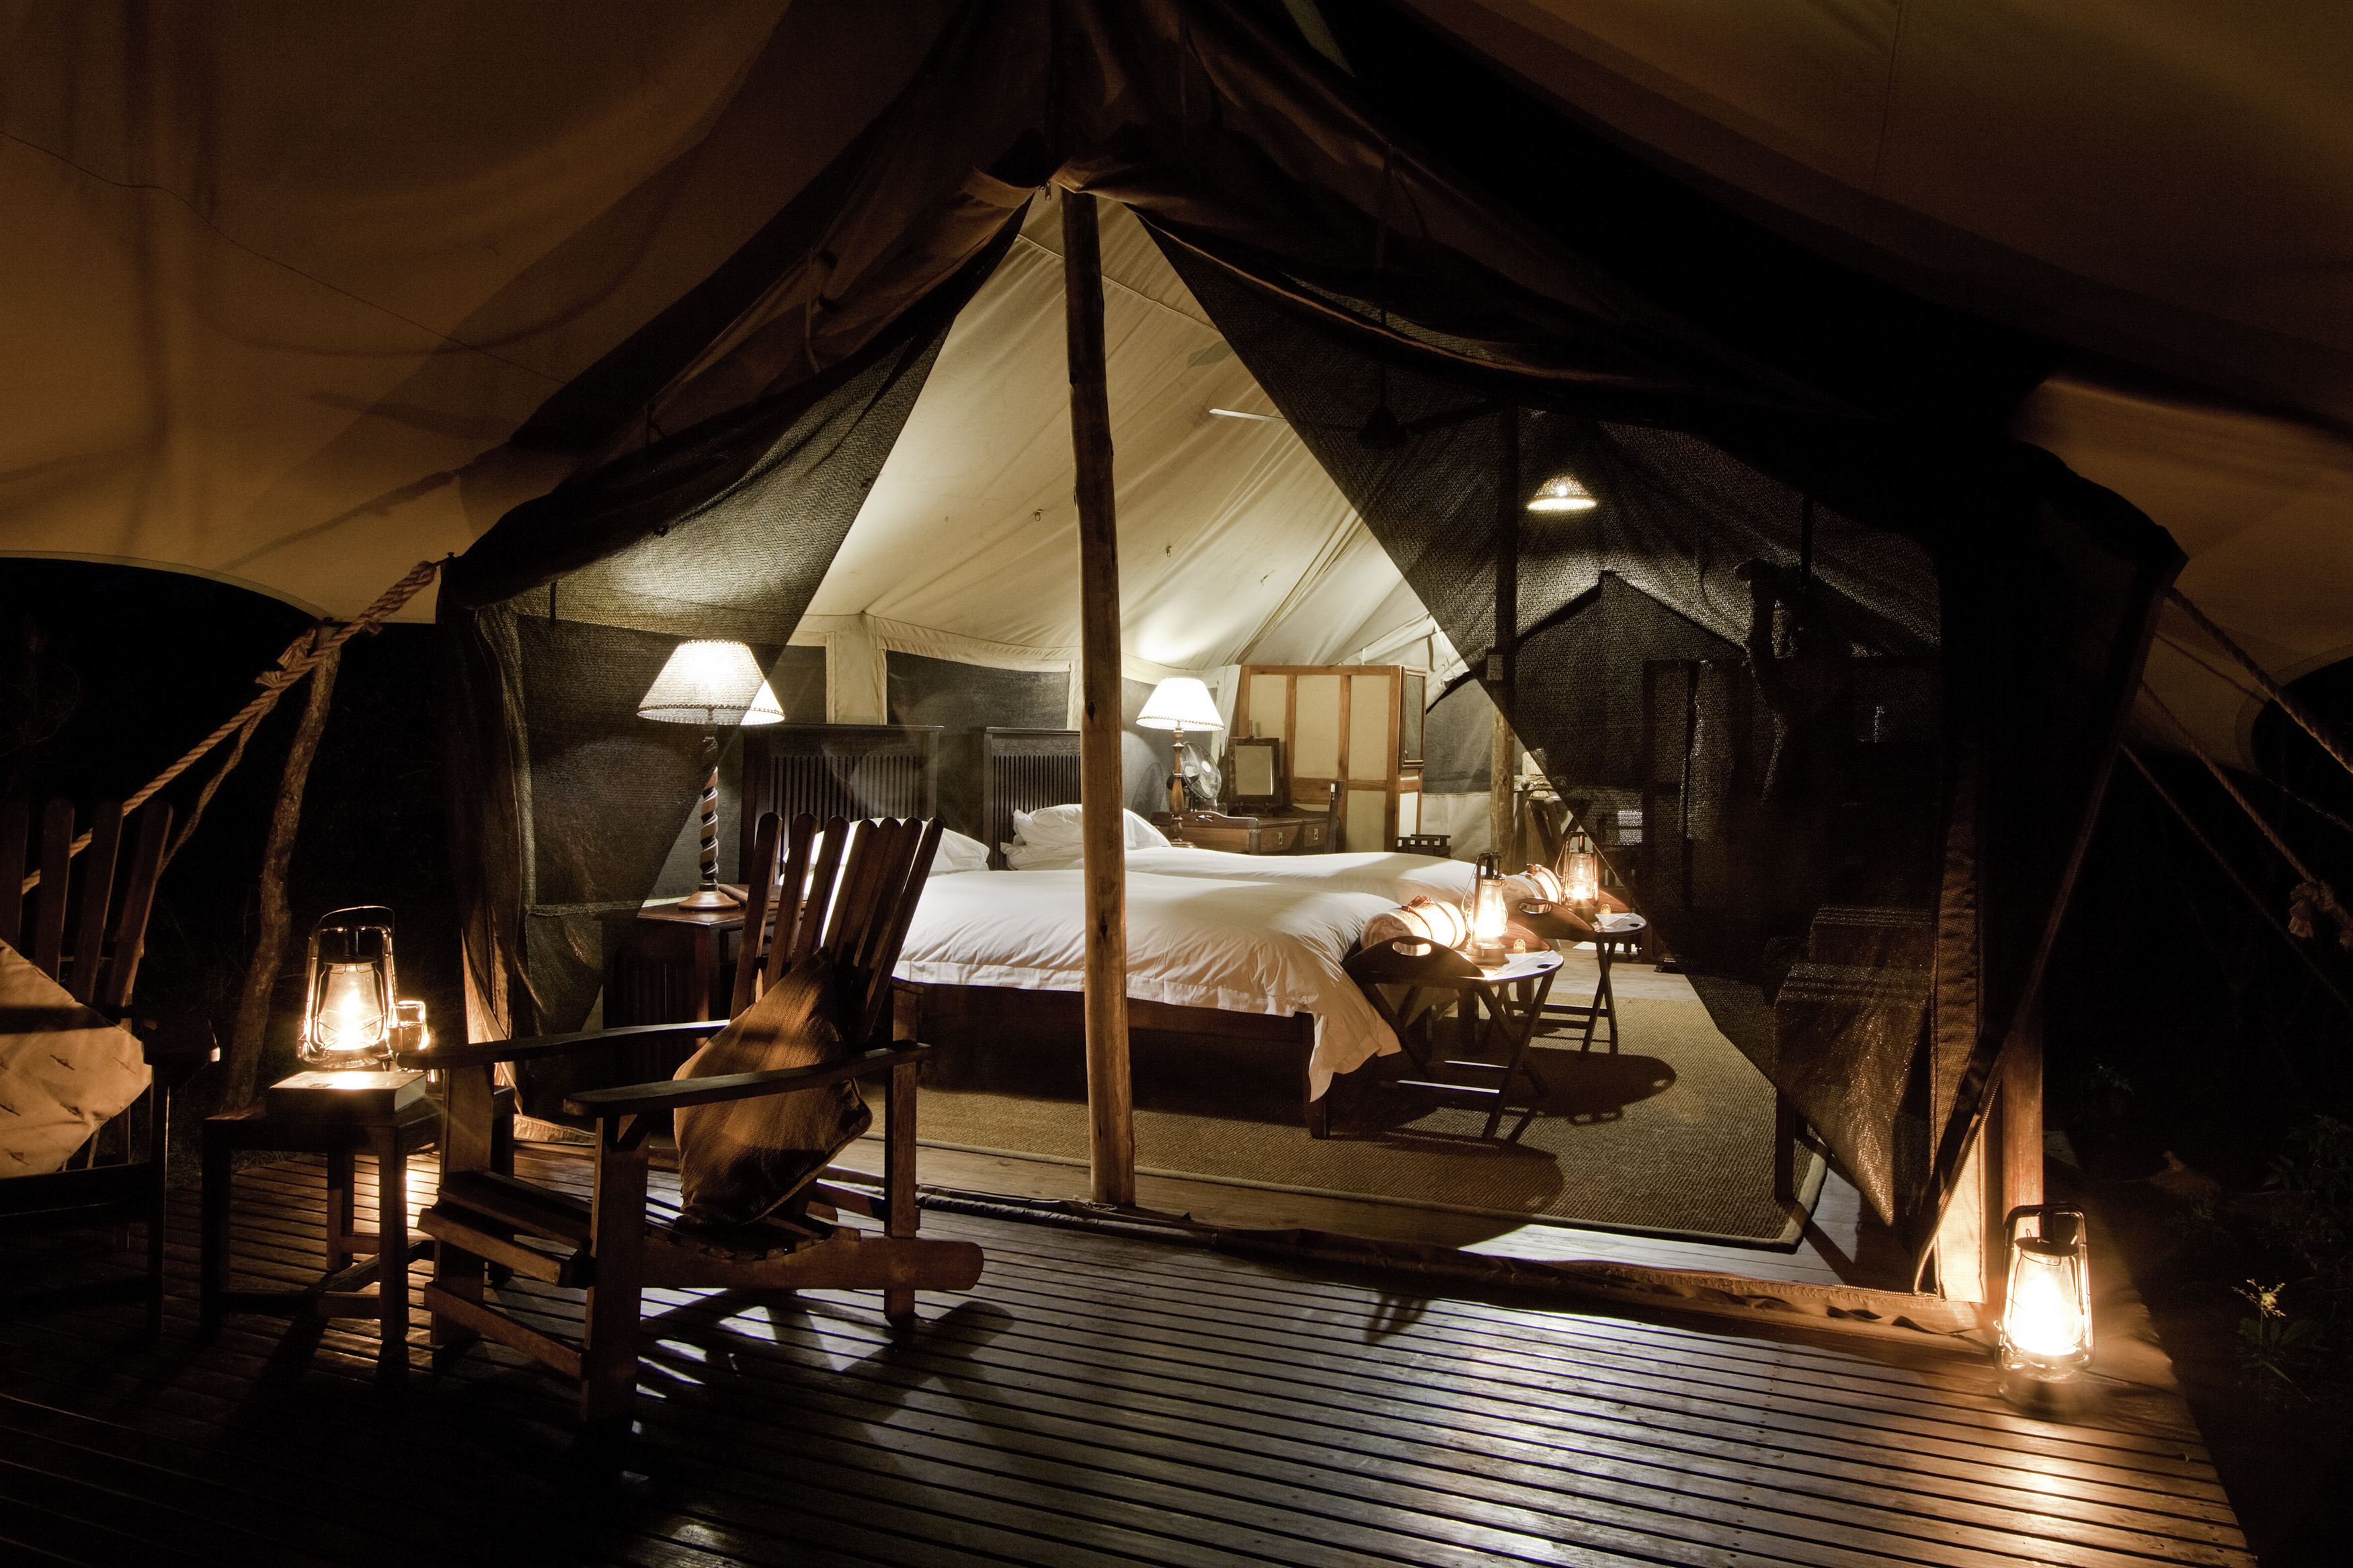 One for the bucket list - sleeping under canvas in an 1820's style explorer tent in the Kruger National Park